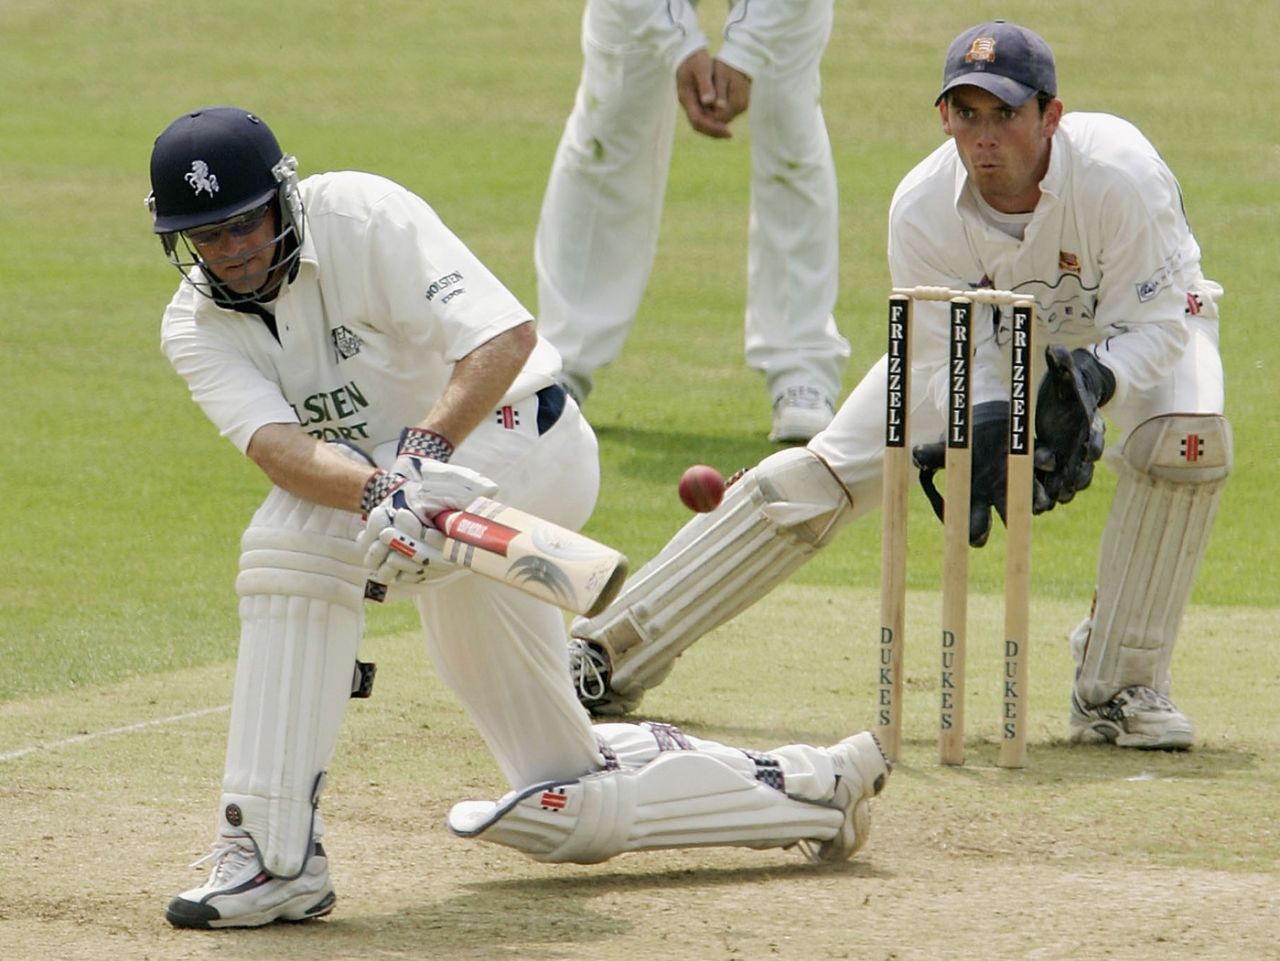 Wicketkeeper James Foster watches batsman David Fulton try to sweep a ball, Essex v Kent, County Championship Division One, Chelmsford, 1st day, June 27, 2003